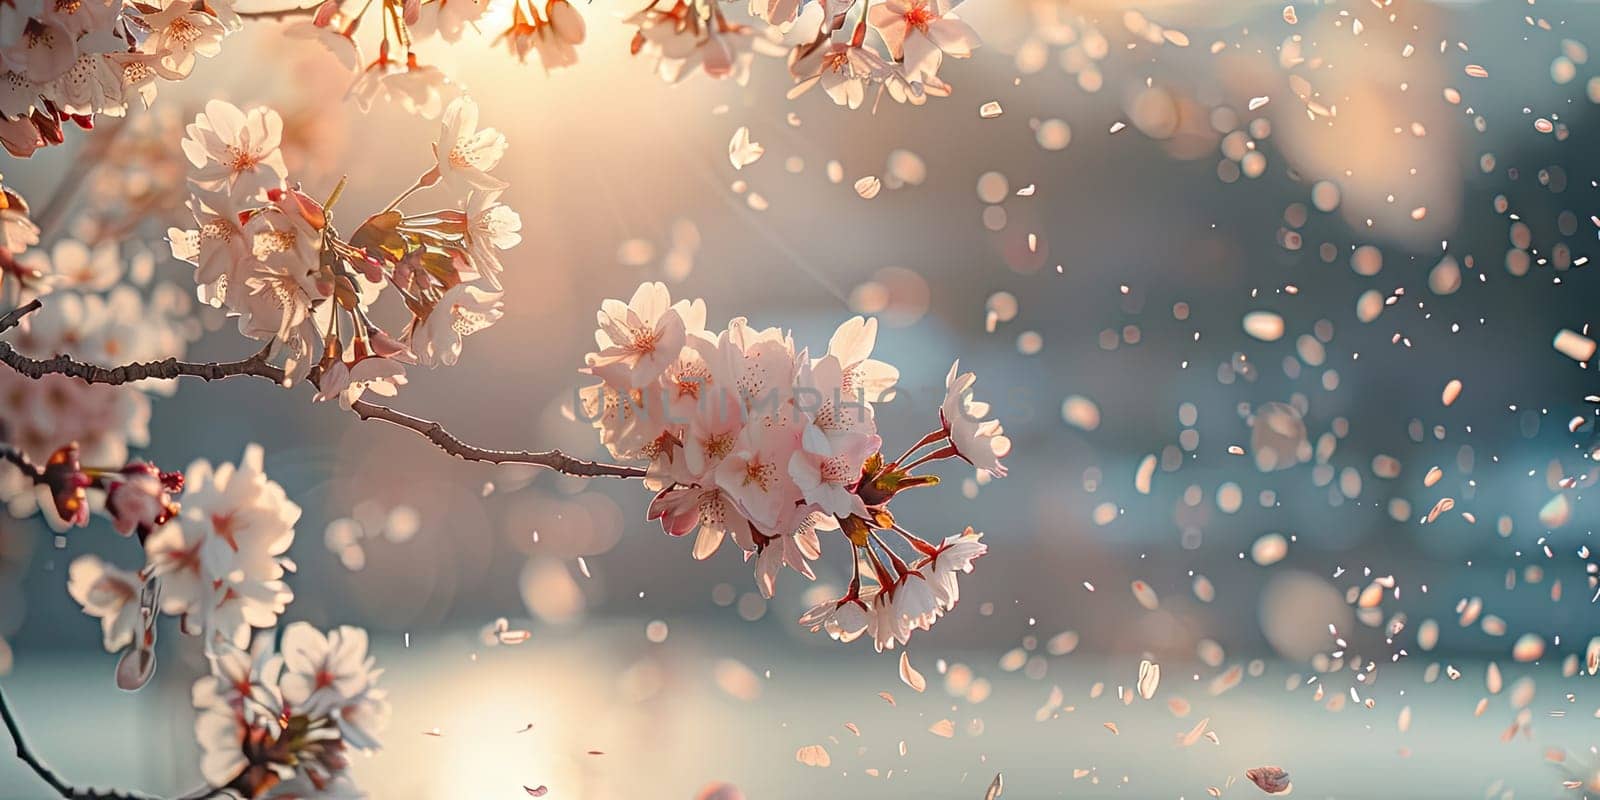 Cherry blossom branch in full bloom with petals in the air, warm sunlight backlighting delicate pink flowers against soft focus background. Floral sakura background. Ai generation. High quality photo